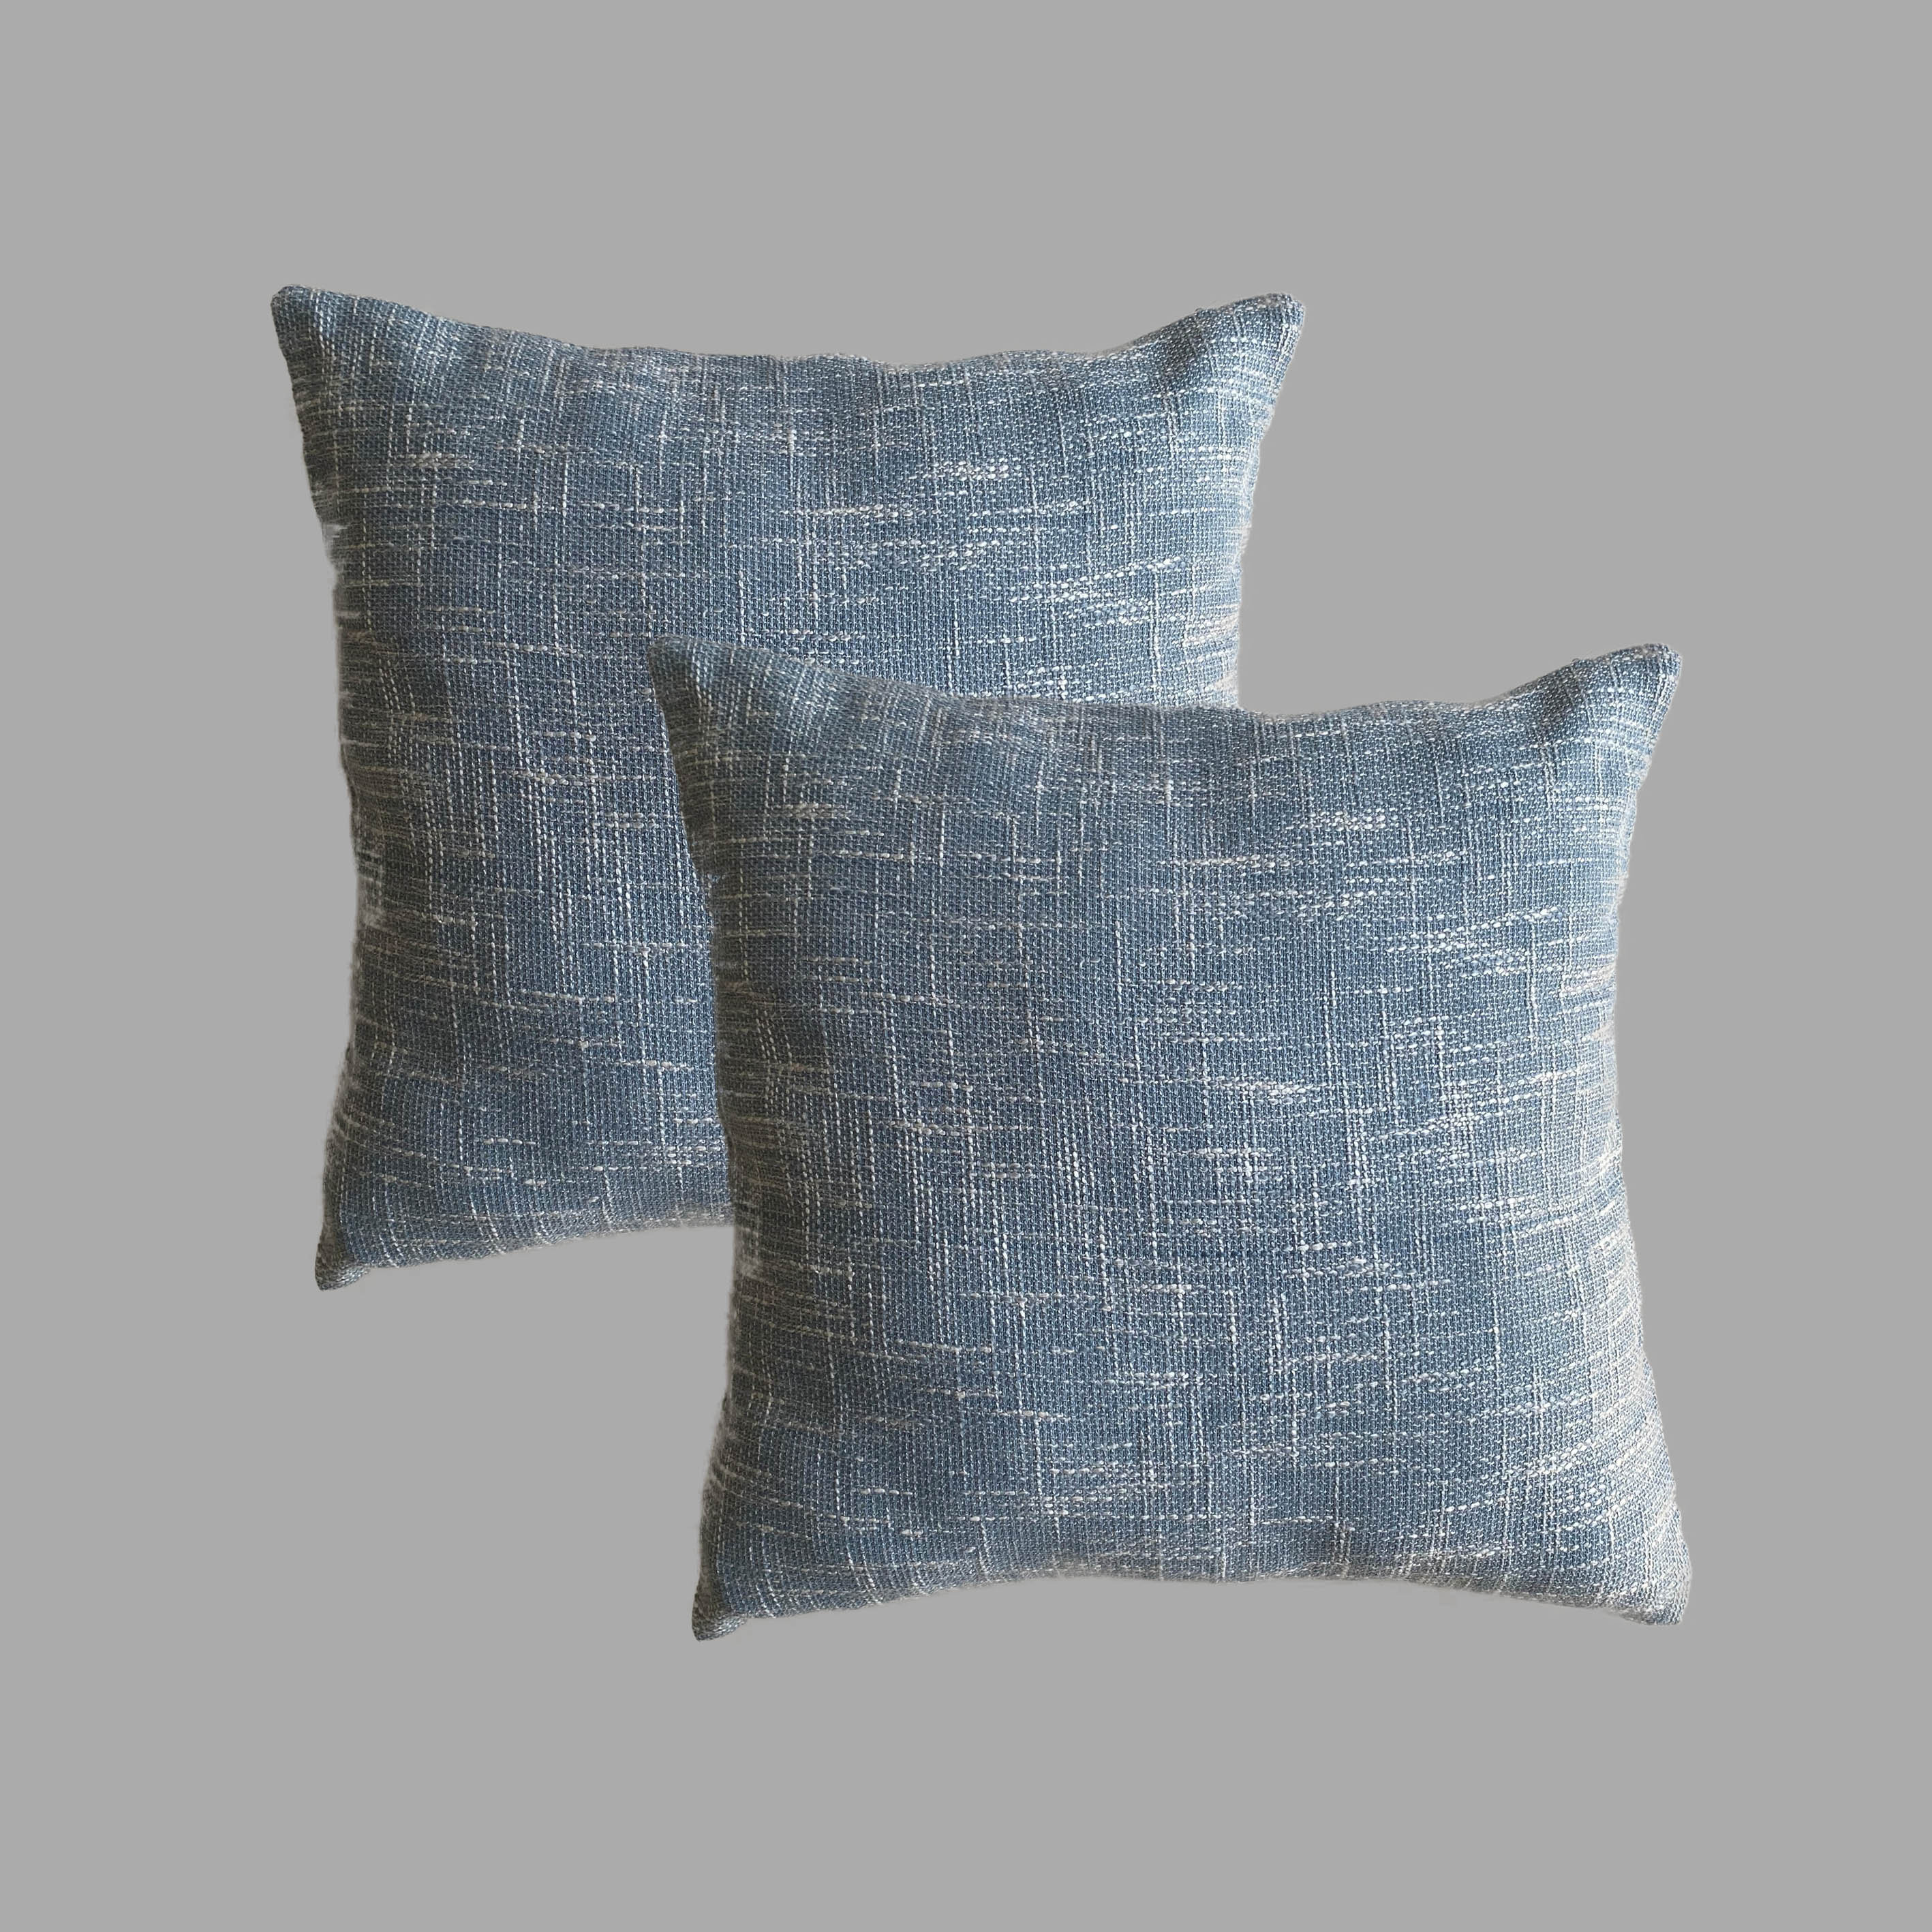 Kimmell Square Pillow Cover & Insert (Set of 2) Andover Mills Color: Blue